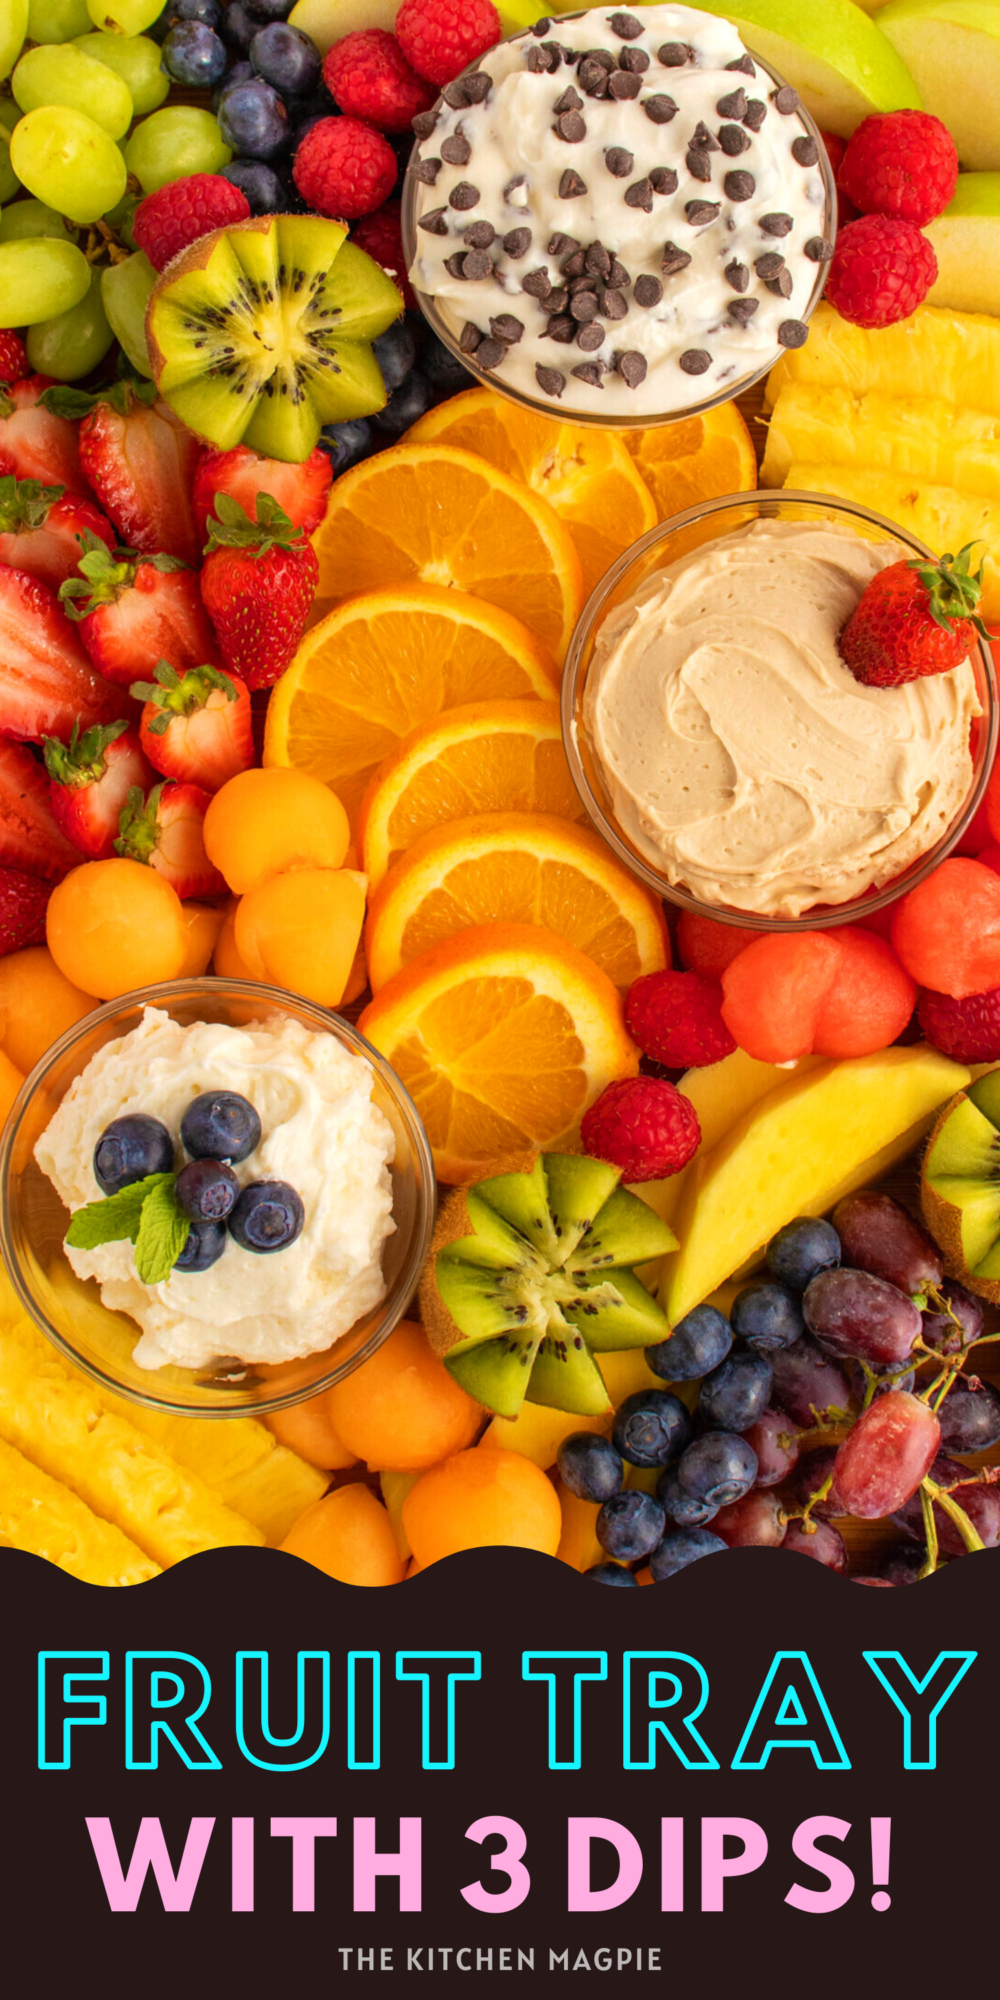 How to prepare fruit for a fresh fruit platter, and three delicious recipes for different fruit dips to serve on the platter.